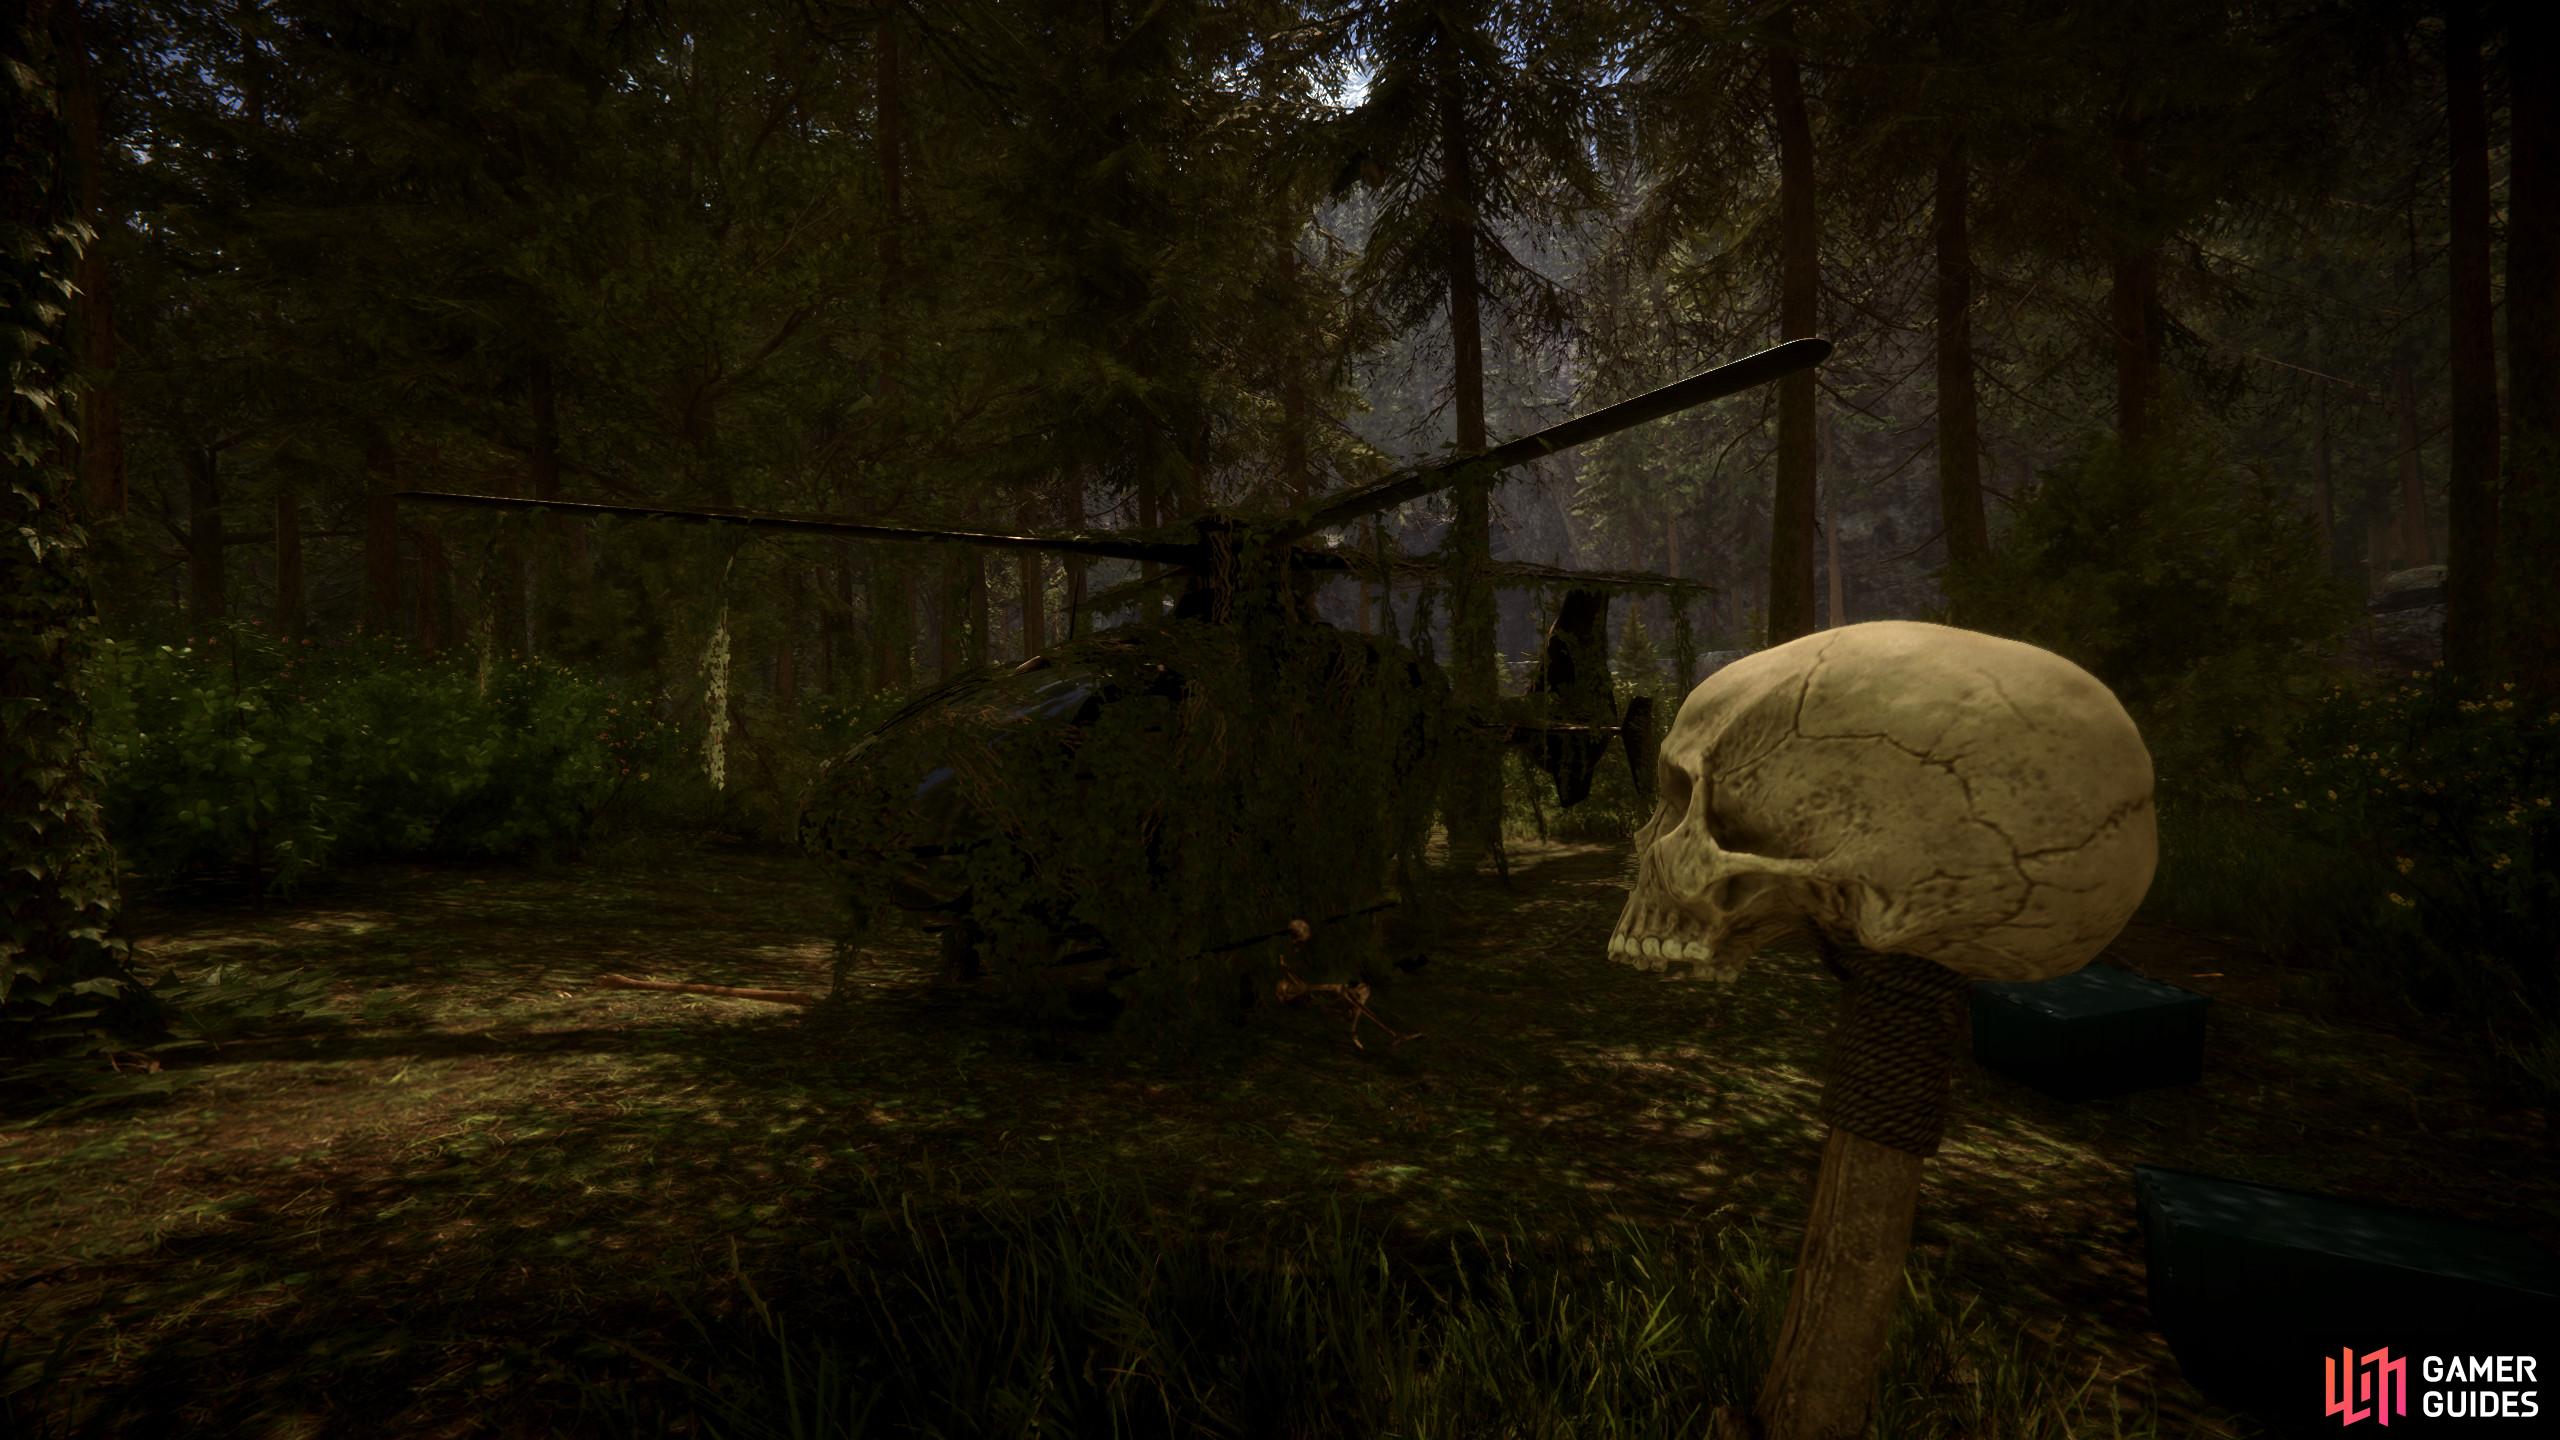 We'll soon enter mutant town when the Sons of the Forest release time arrives. Image via Endnight.